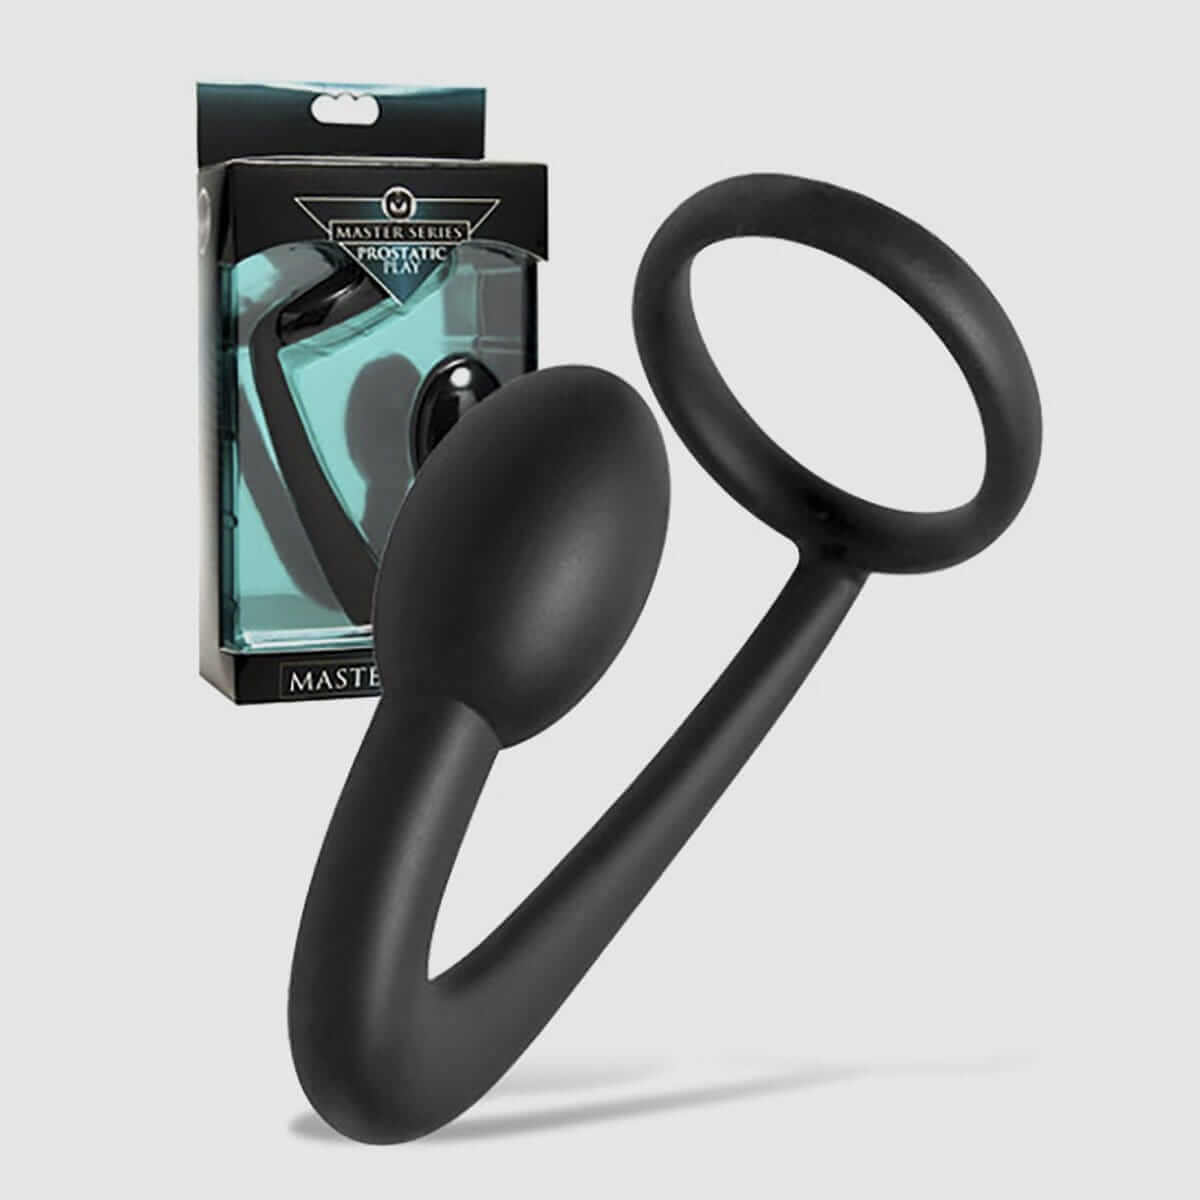 Prostatic Play Explorer Silicone Cock Ring and Prostate Plug - Thorn & Feather Sex Toy Canada